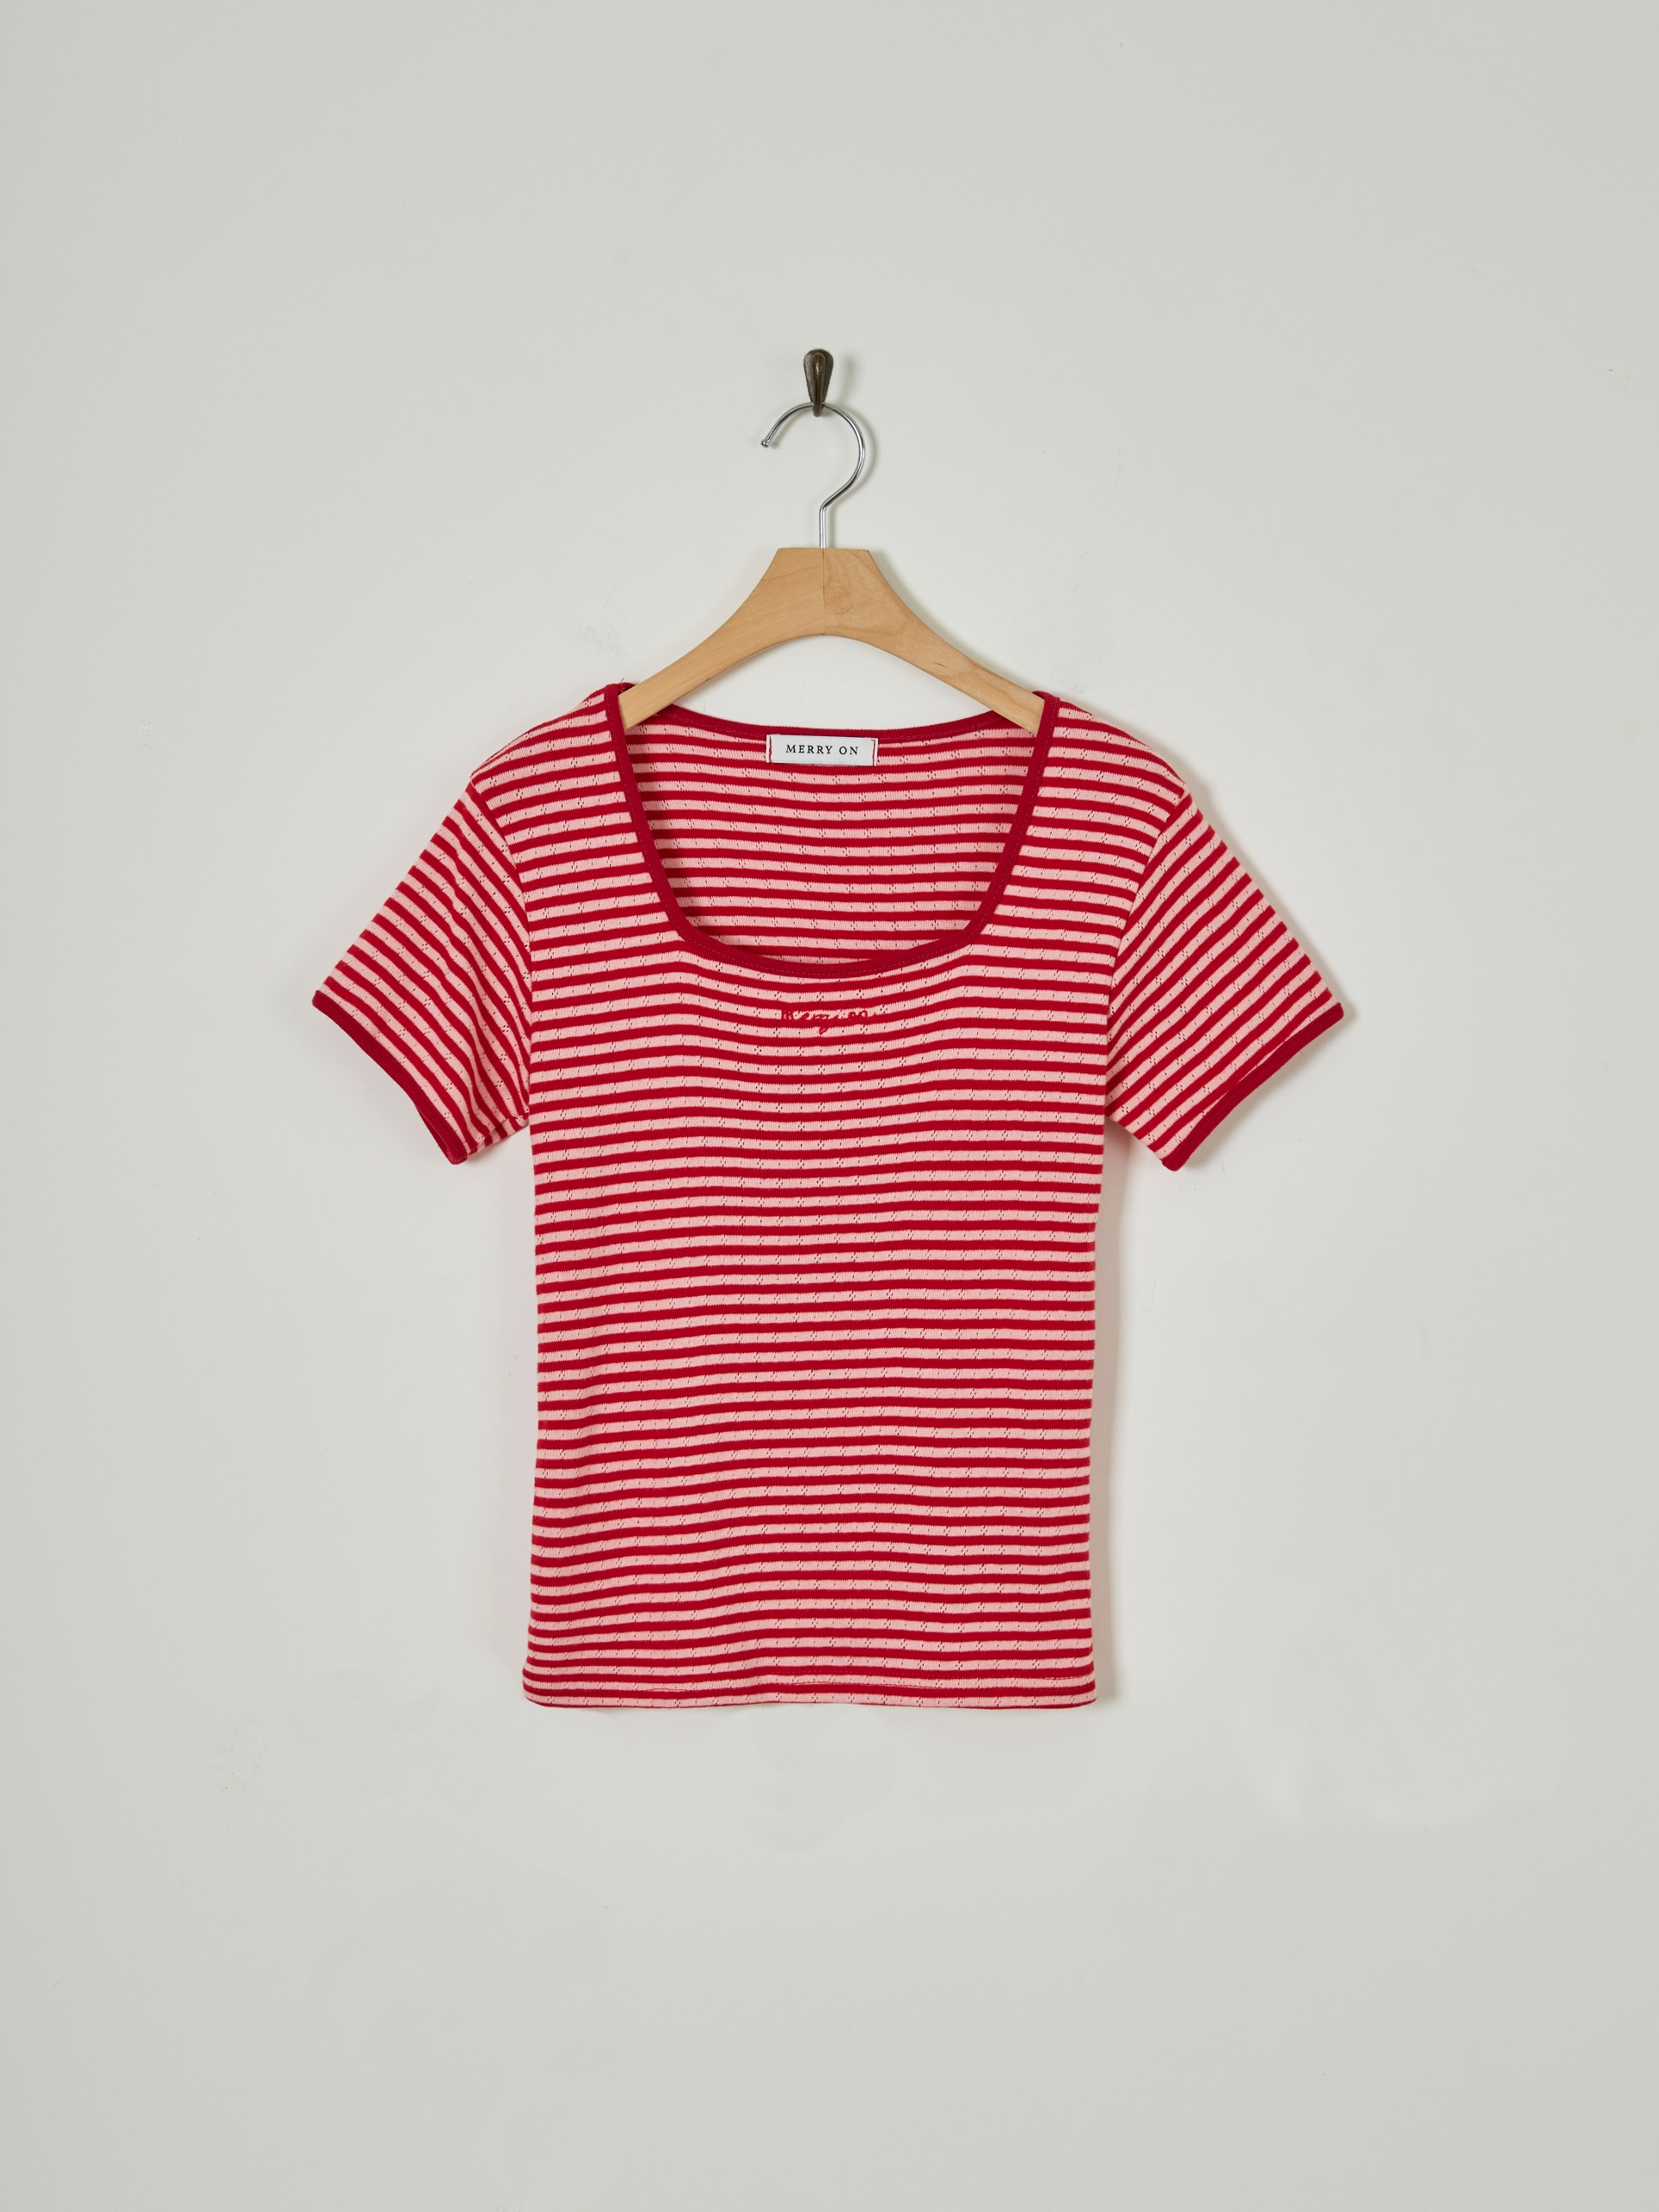 Peter Stripe T-shirt [RED]*05.12 Reservation for delivery